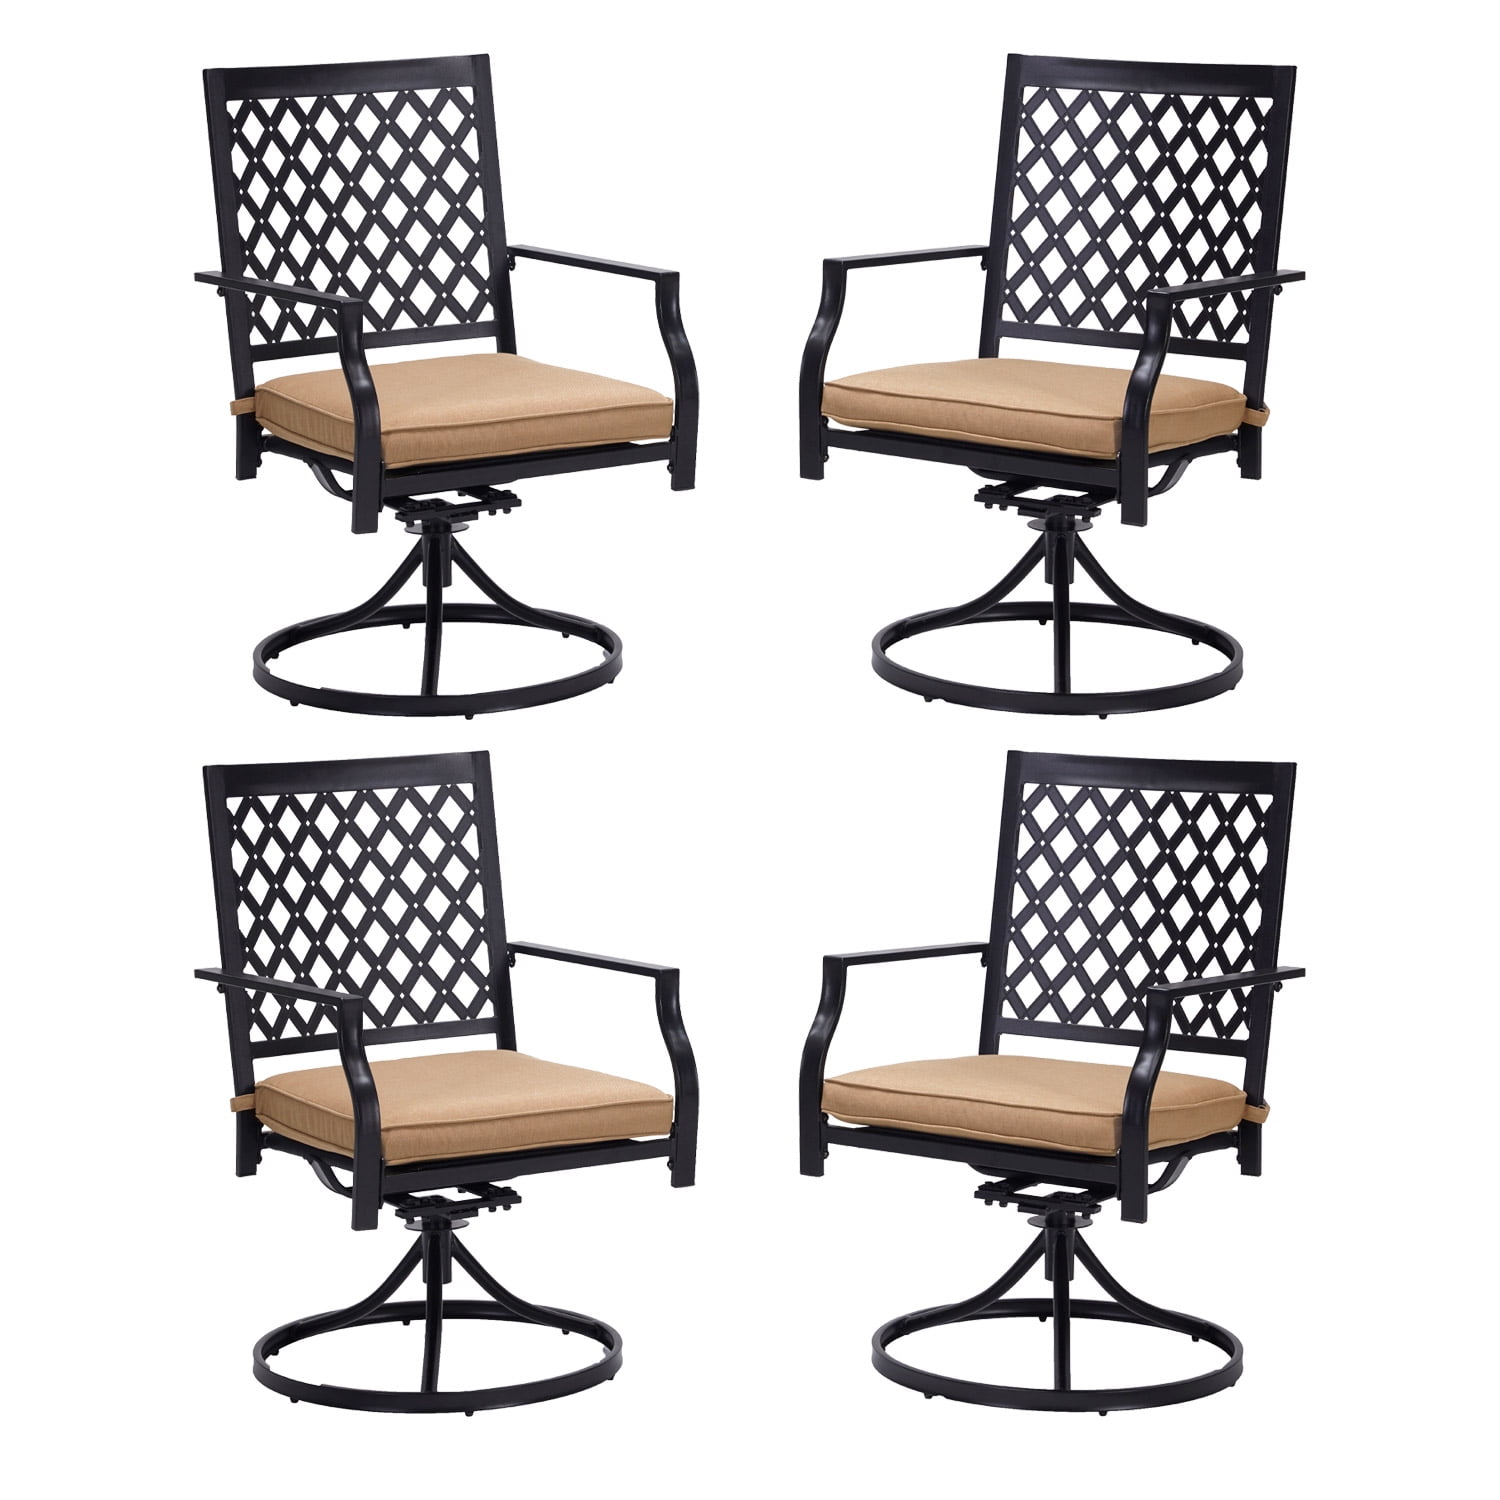 Vicllax Outdoor Swivel Dining Chairs Patio Furniture for Garden Porch Set for 4